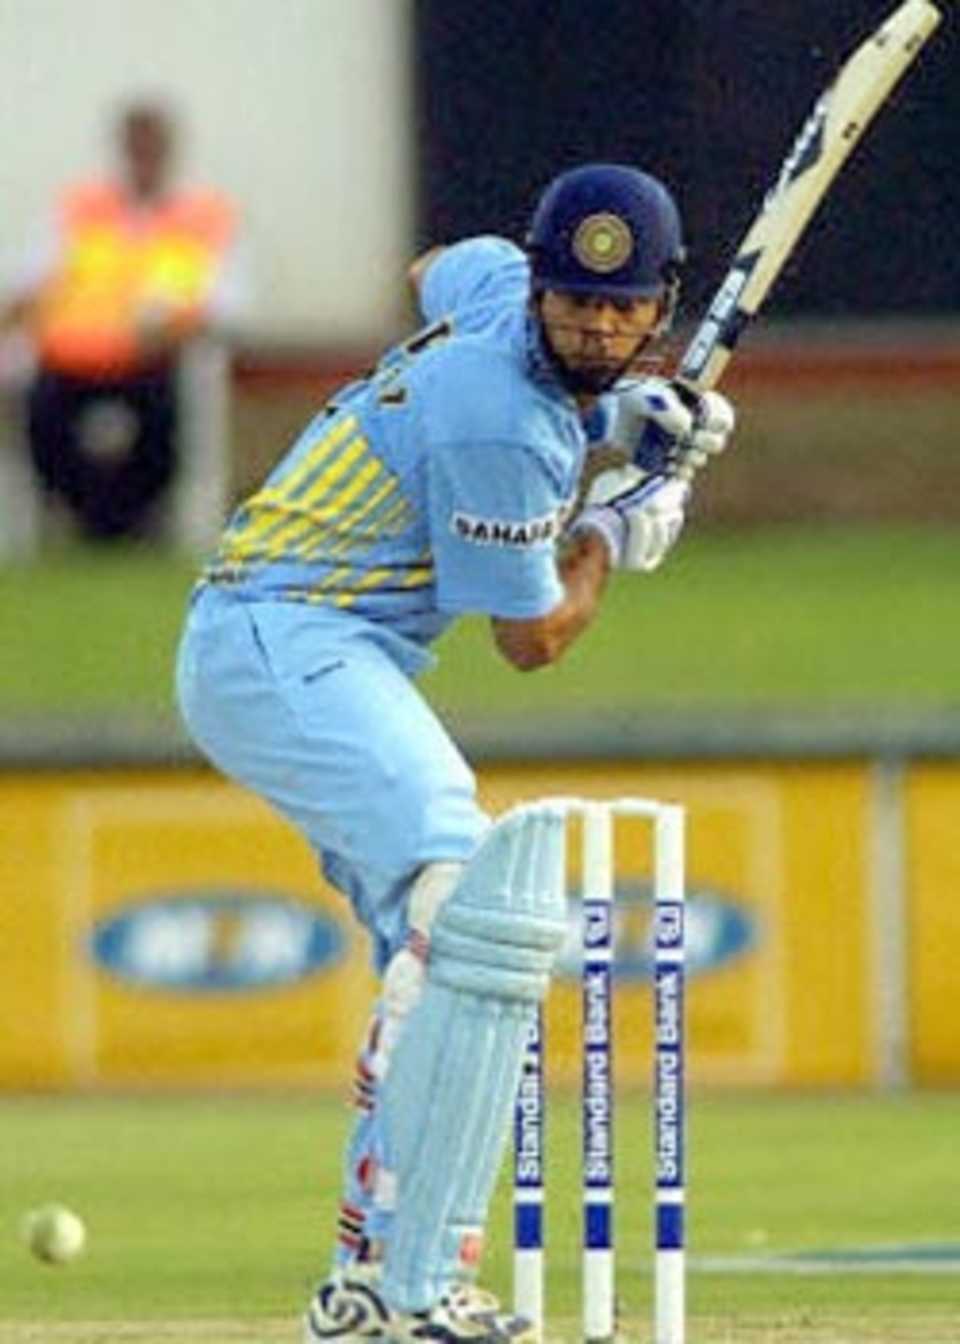 Yuvraj Singh gets into position to essay one of his trademark booming drives